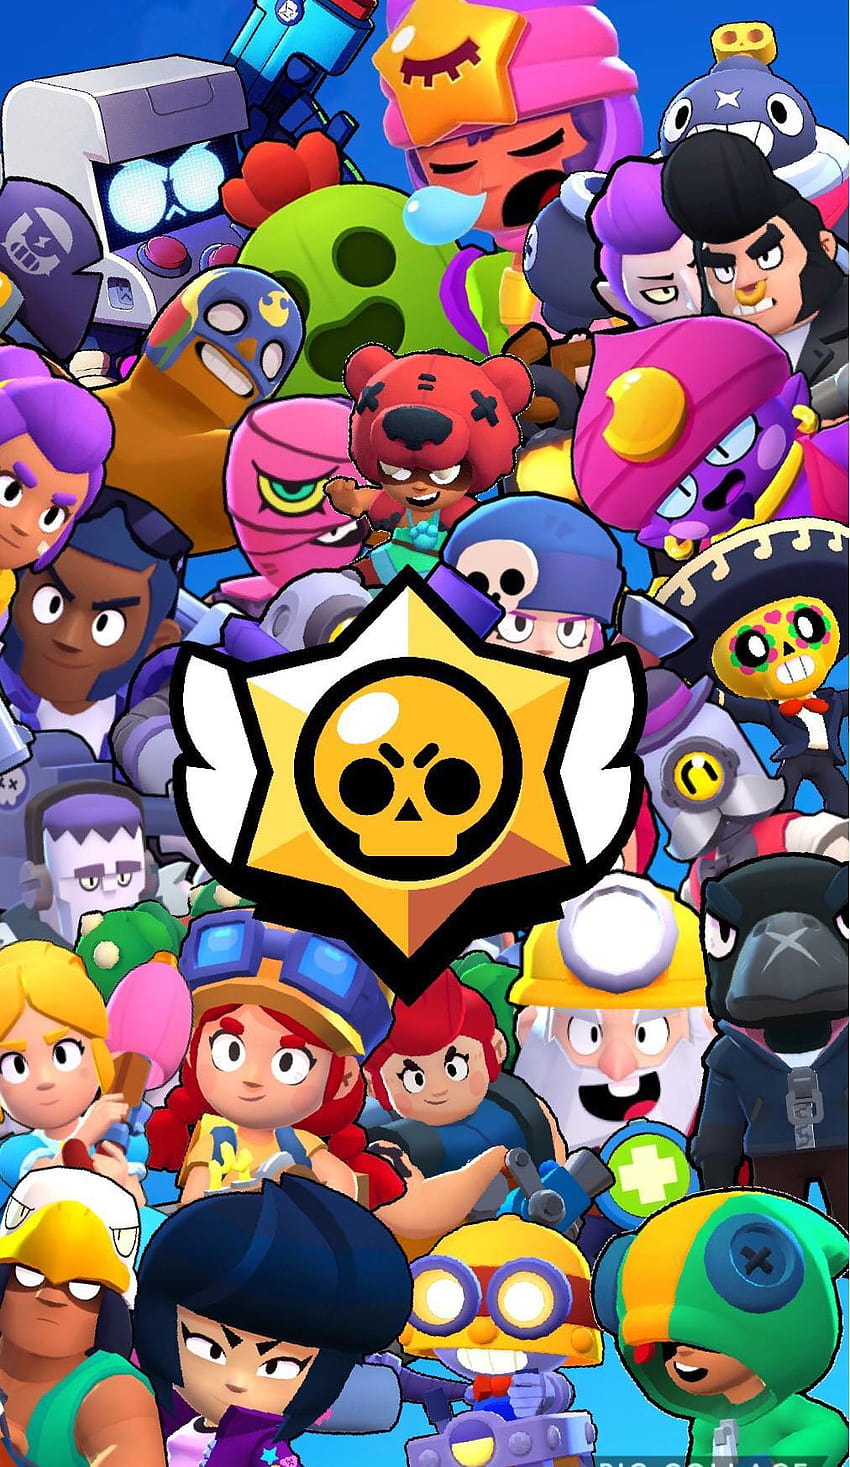 Got bored and made a for your phone : Brawlstars, brawl stars phone HD phone wallpaper